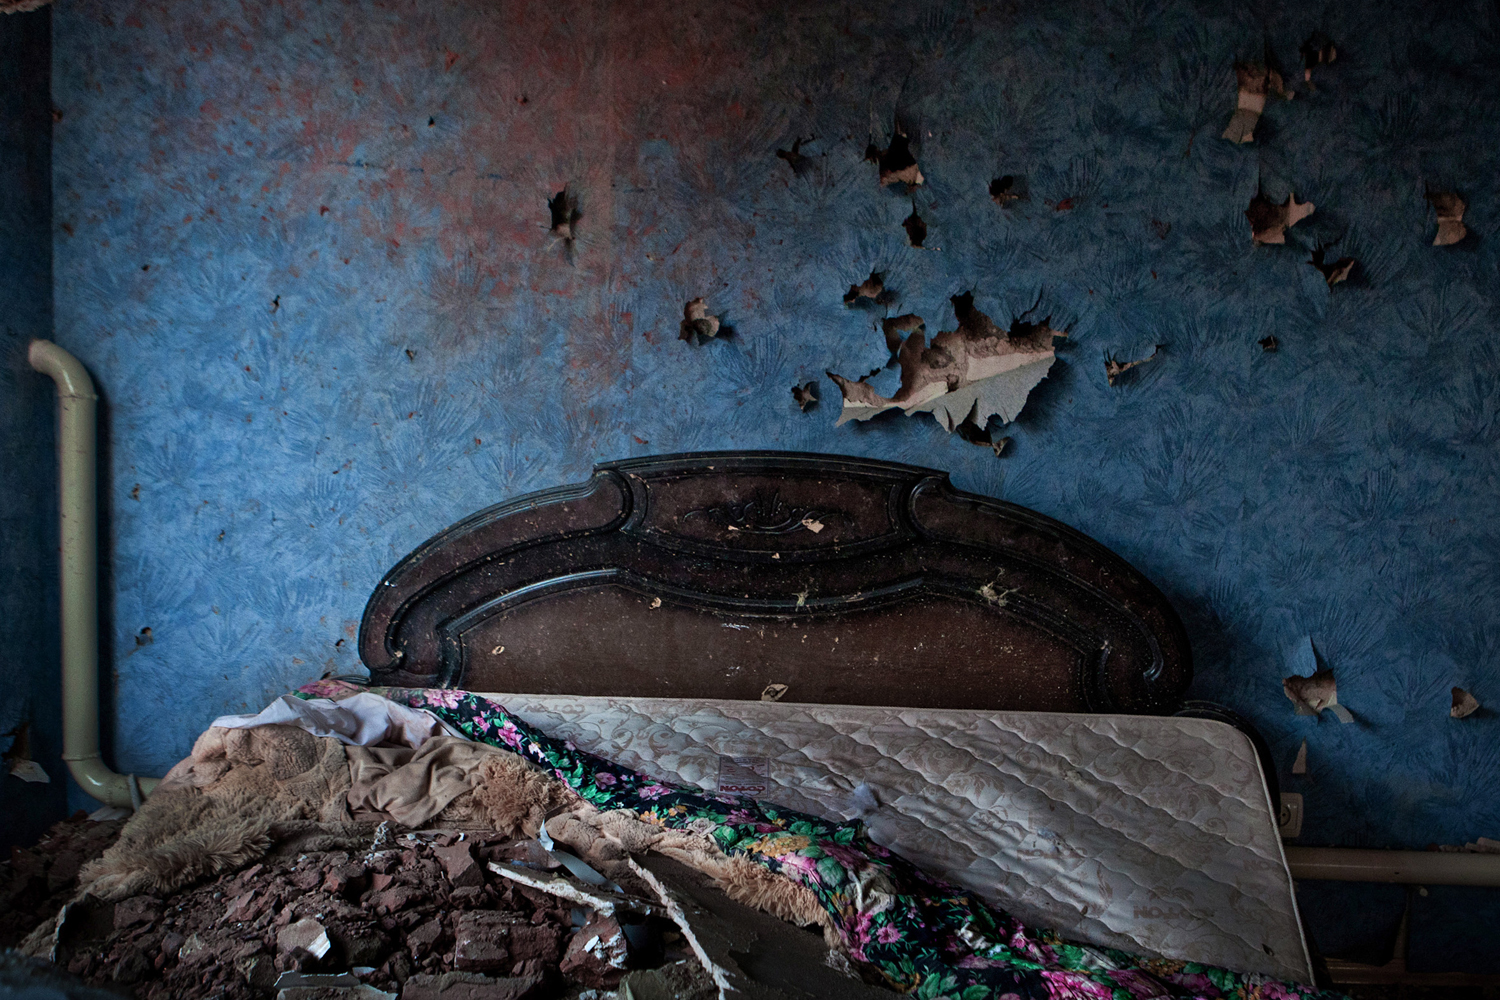 A bed seen in the house after the special forces operation when four people were killed suspected to be insurgents.